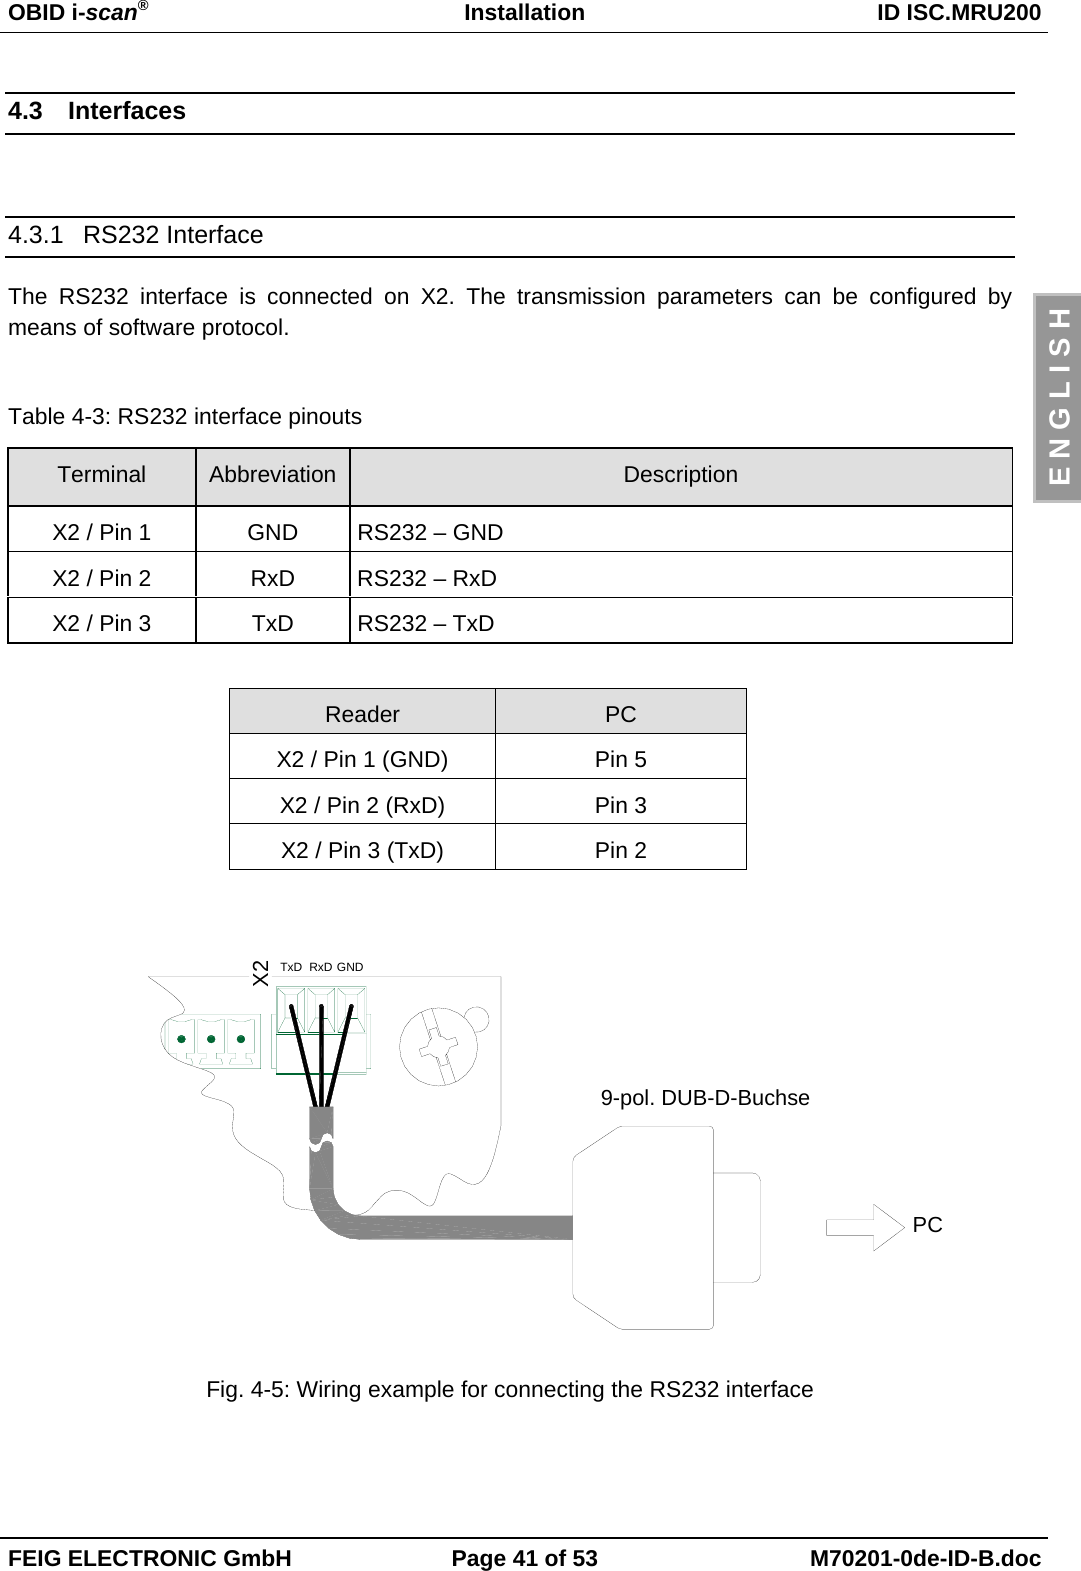 OBID i-scan®Installation ID ISC.MRU200FEIG ELECTRONIC GmbH Page 41 of 53 M70201-0de-ID-B.docE N G L I S H4.3 Interfaces4.3.1 RS232 InterfaceThe RS232 interface is connected on X2. The transmission parameters can be configured bymeans of software protocol.Table 4-3: RS232 interface pinoutsTerminal Abbreviation DescriptionX2 / Pin 1 GND RS232 – GNDX2 / Pin 2 RxD RS232 – RxDX2 / Pin 3 TxD RS232 – TxDReader PCX2 / Pin 1 (GND) Pin 5X2 / Pin 2 (RxD) Pin 3X2 / Pin 3 (TxD) Pin 2Fig. 4-5: Wiring example for connecting the RS232 interfaceX2TxD RxD GNDPC9-pol. DUB-D-Buchse